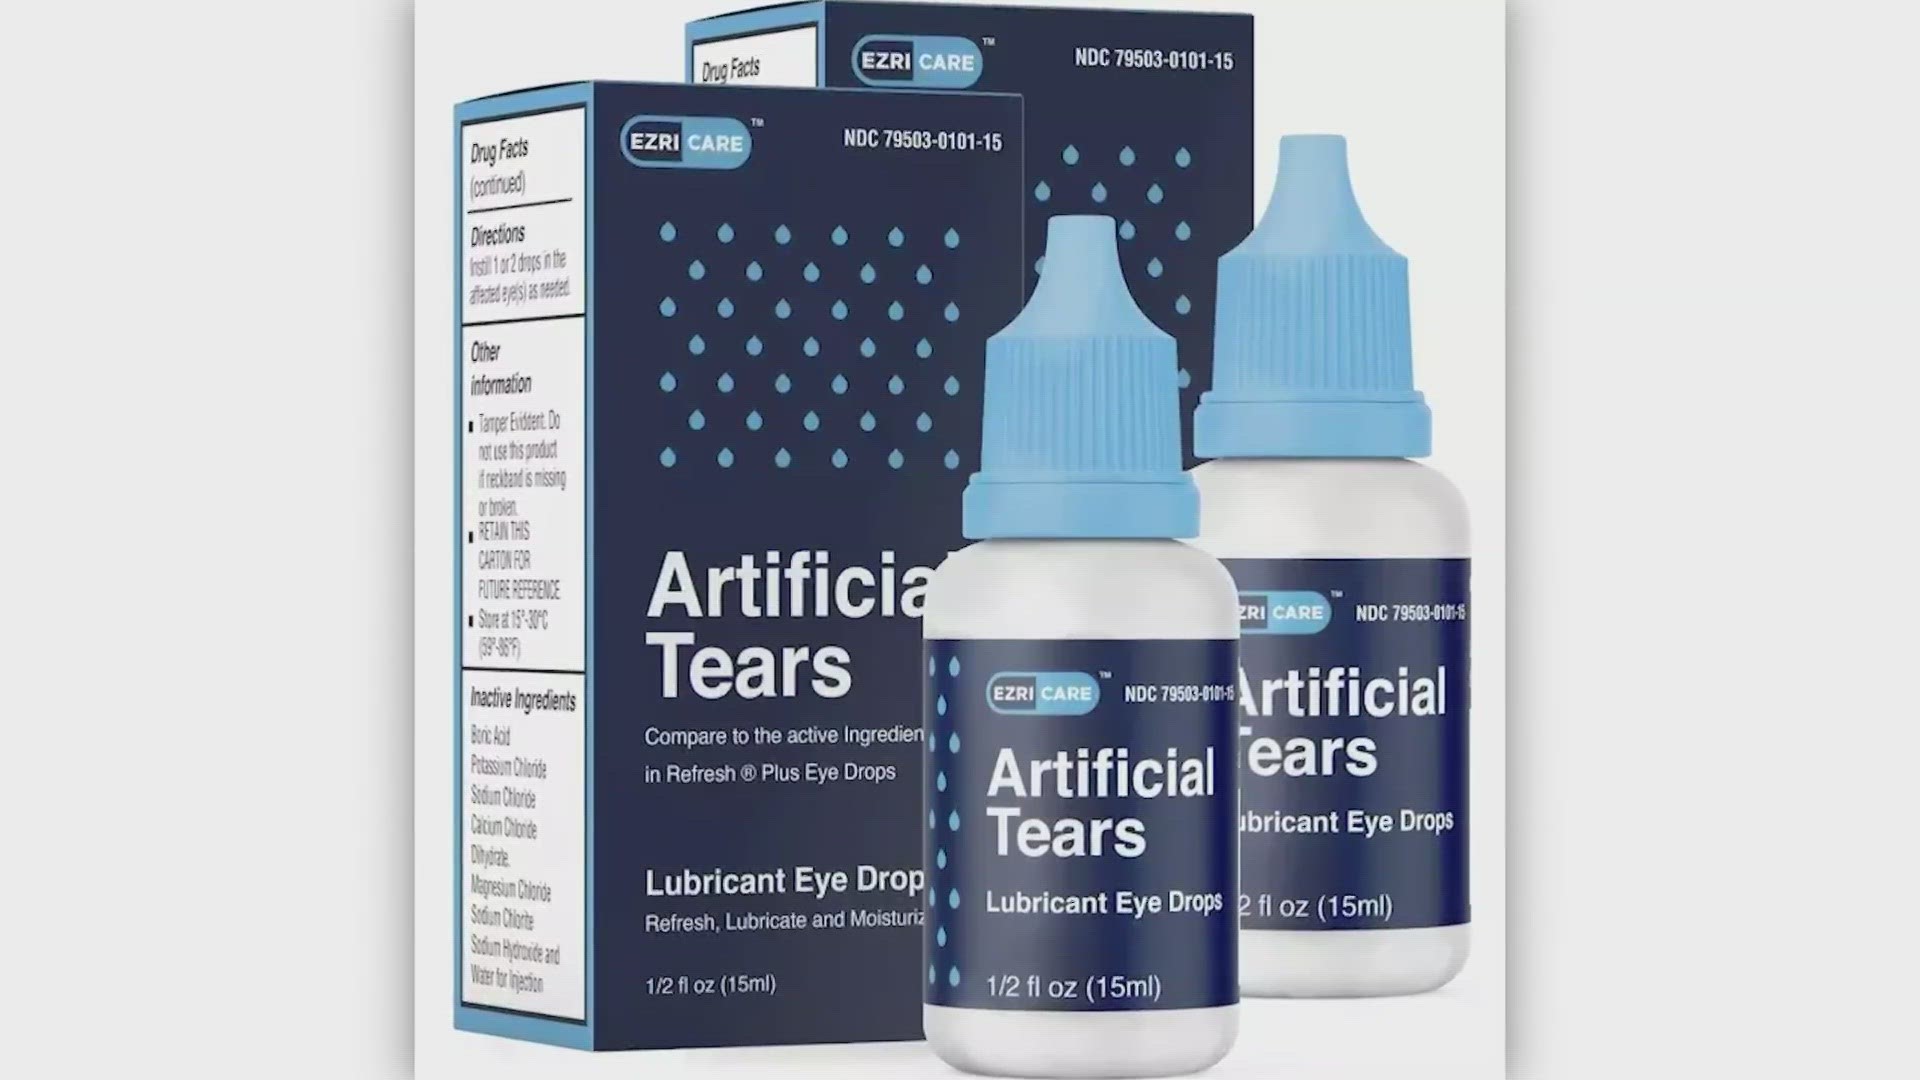 The CDC has connected Artificial Tears to at least three deaths and multiple cases of vision loss.